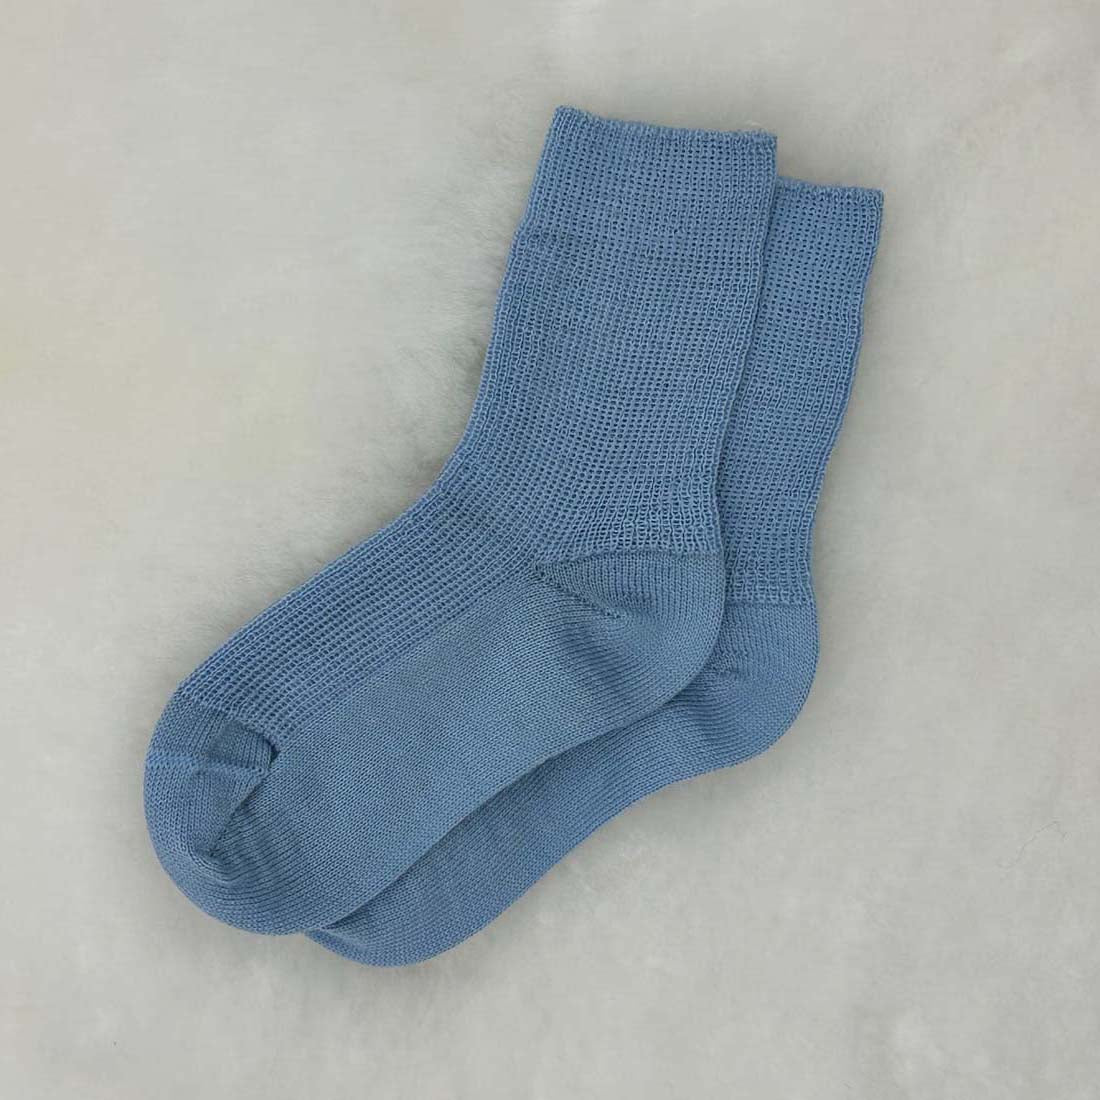 OUTLET Toddler/Kids Organic Wool Socks, Thin - by GRÖDO of Germany